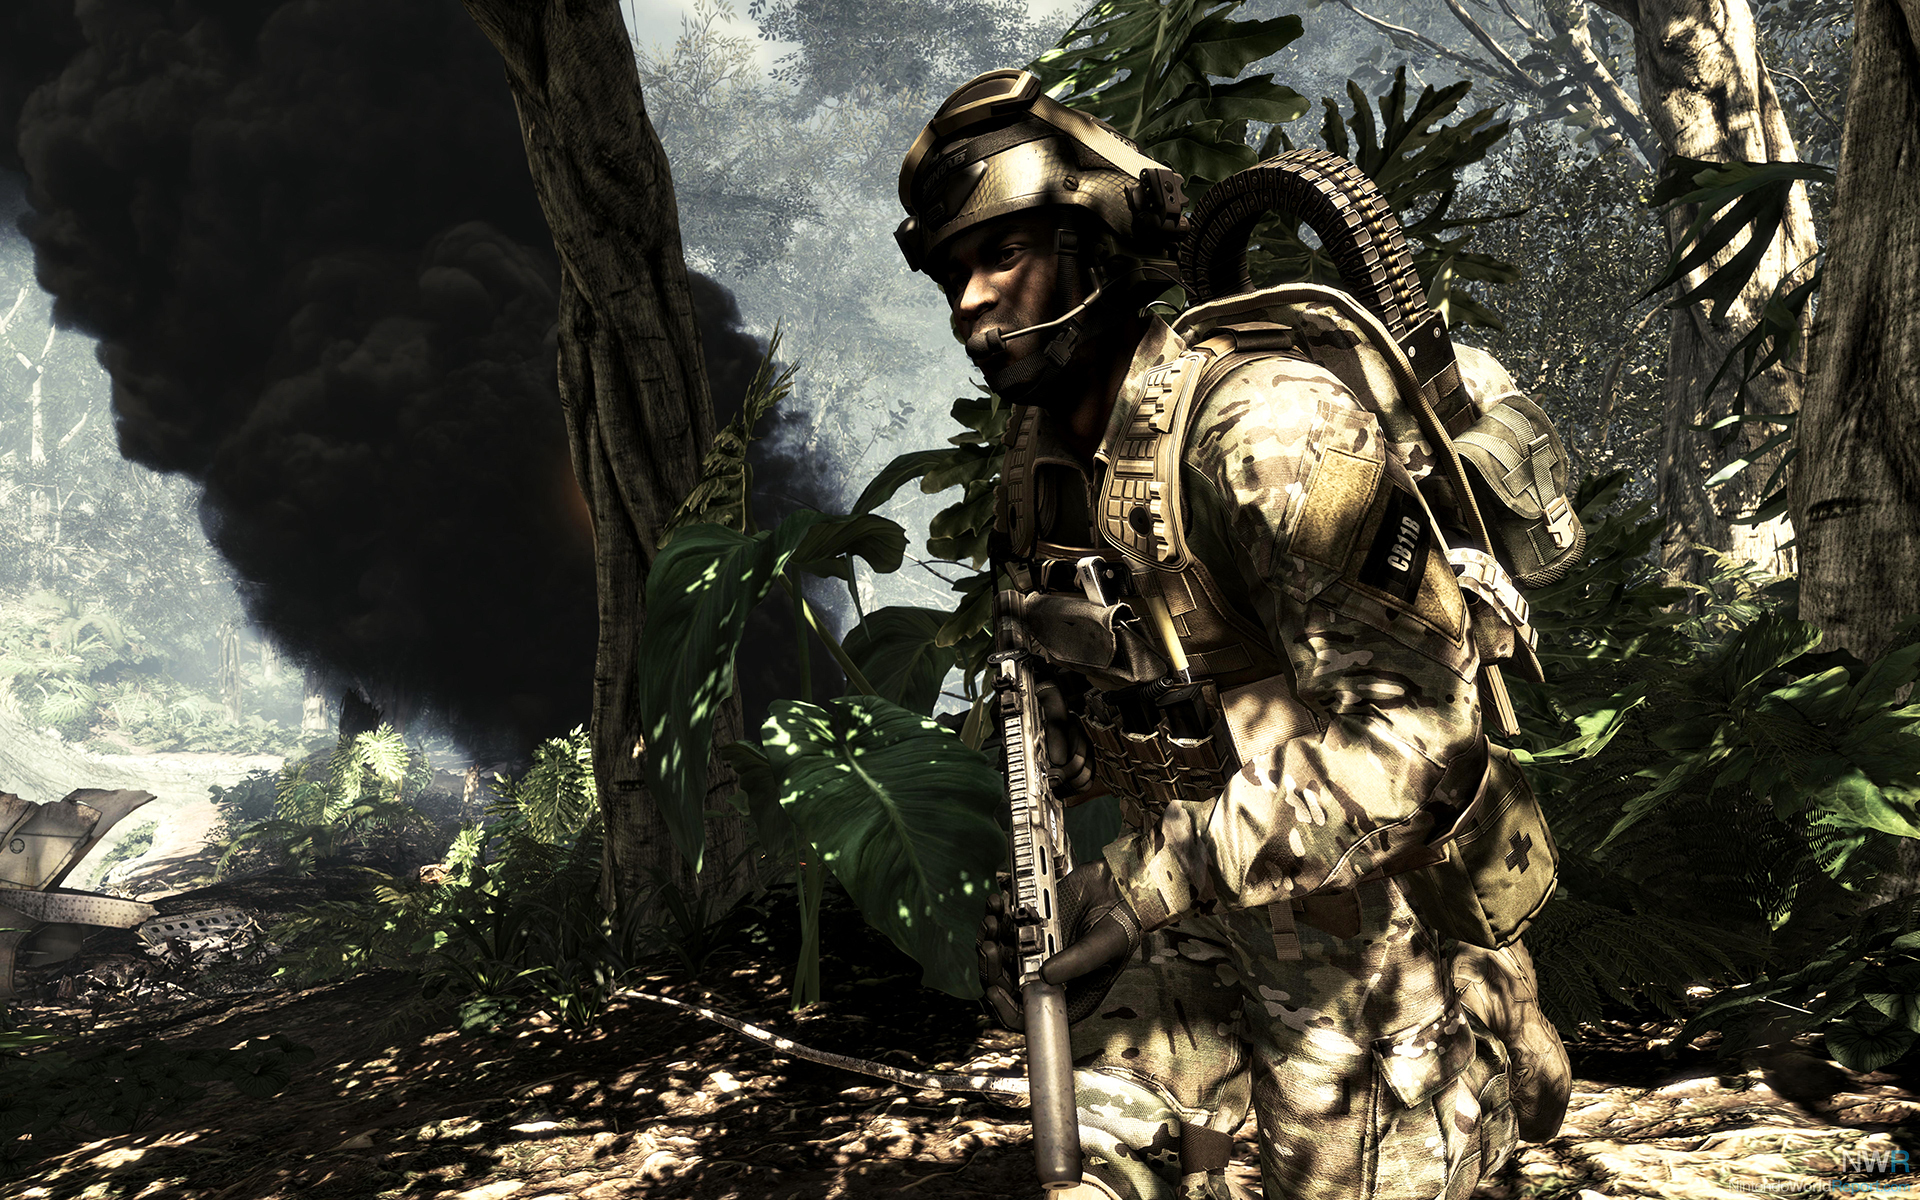 Call of Duty: Ghosts Reviews, Pros and Cons